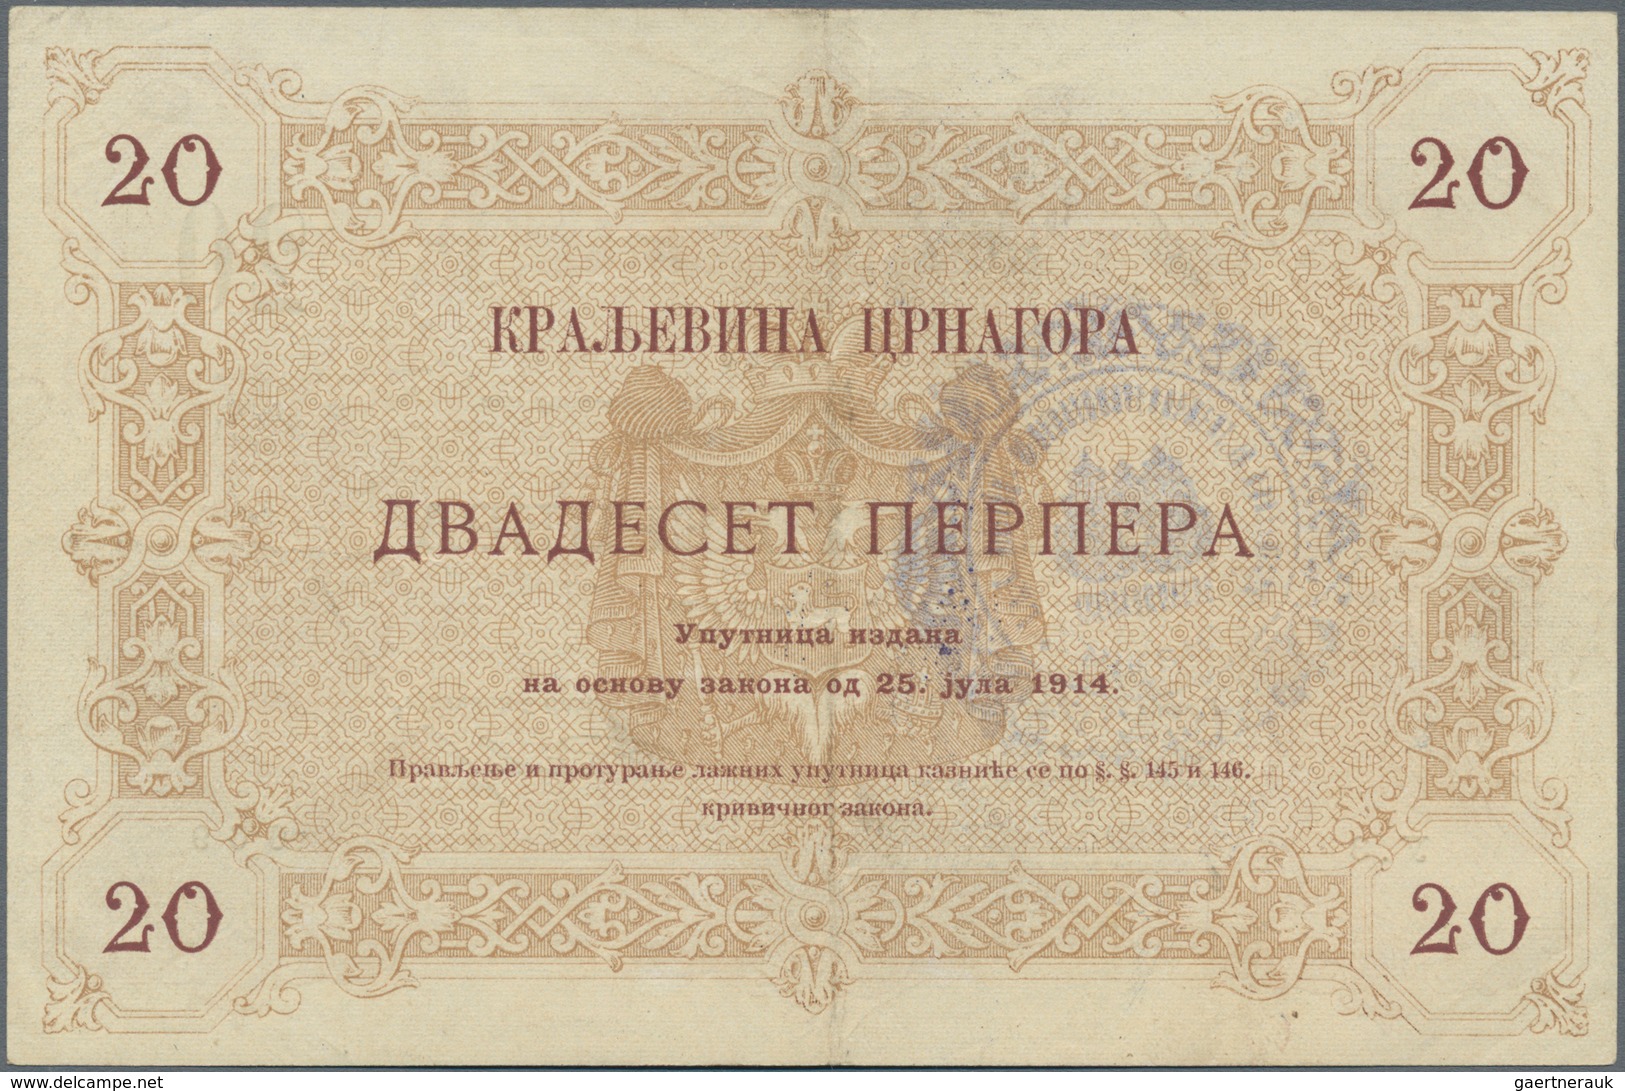 Montenegro: Military Government District Command set with 7 banknotes of the 1914 (1916) Handstamped